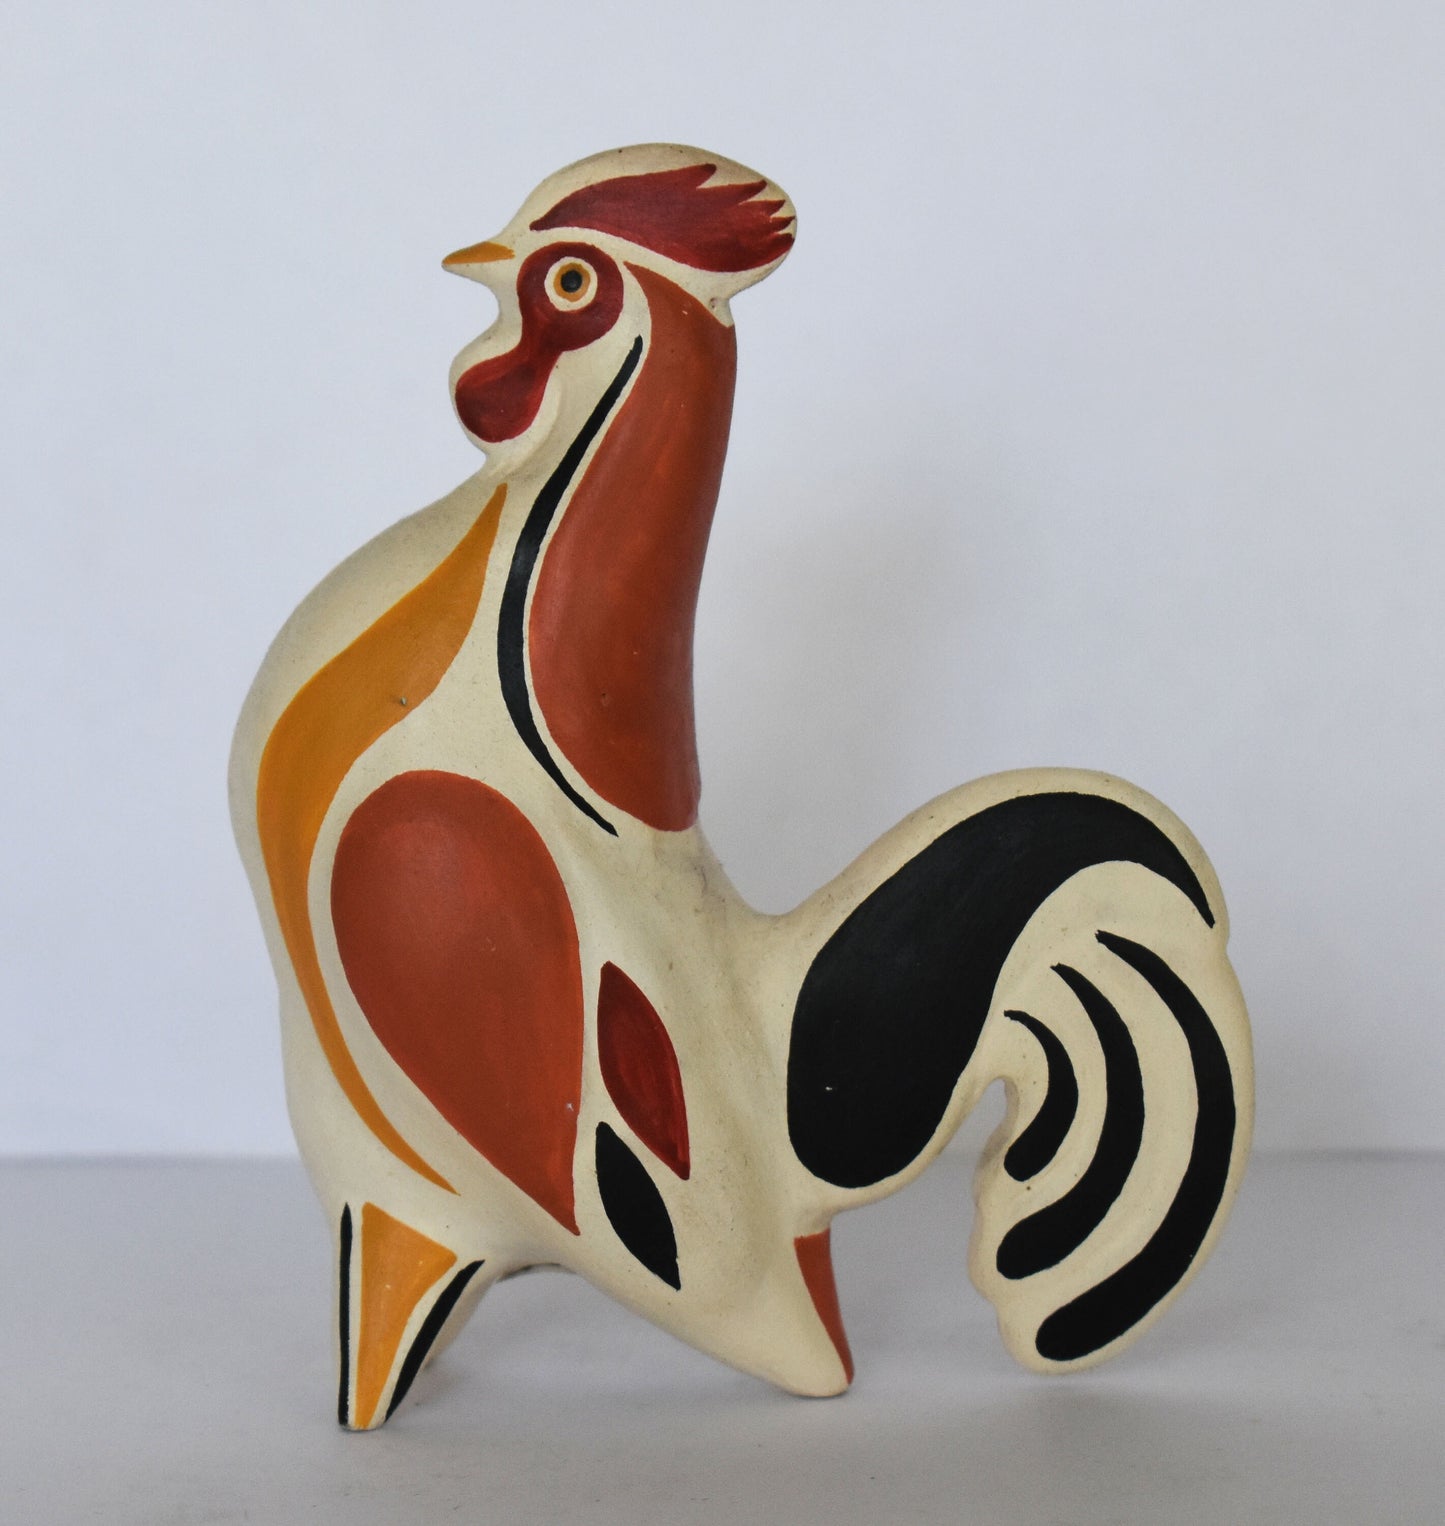 Idol of a Rooster - Attica, Athens - 600 BC - Alectryon's Myth - Miniature - Museum Reproduction - Ceramic Artifact